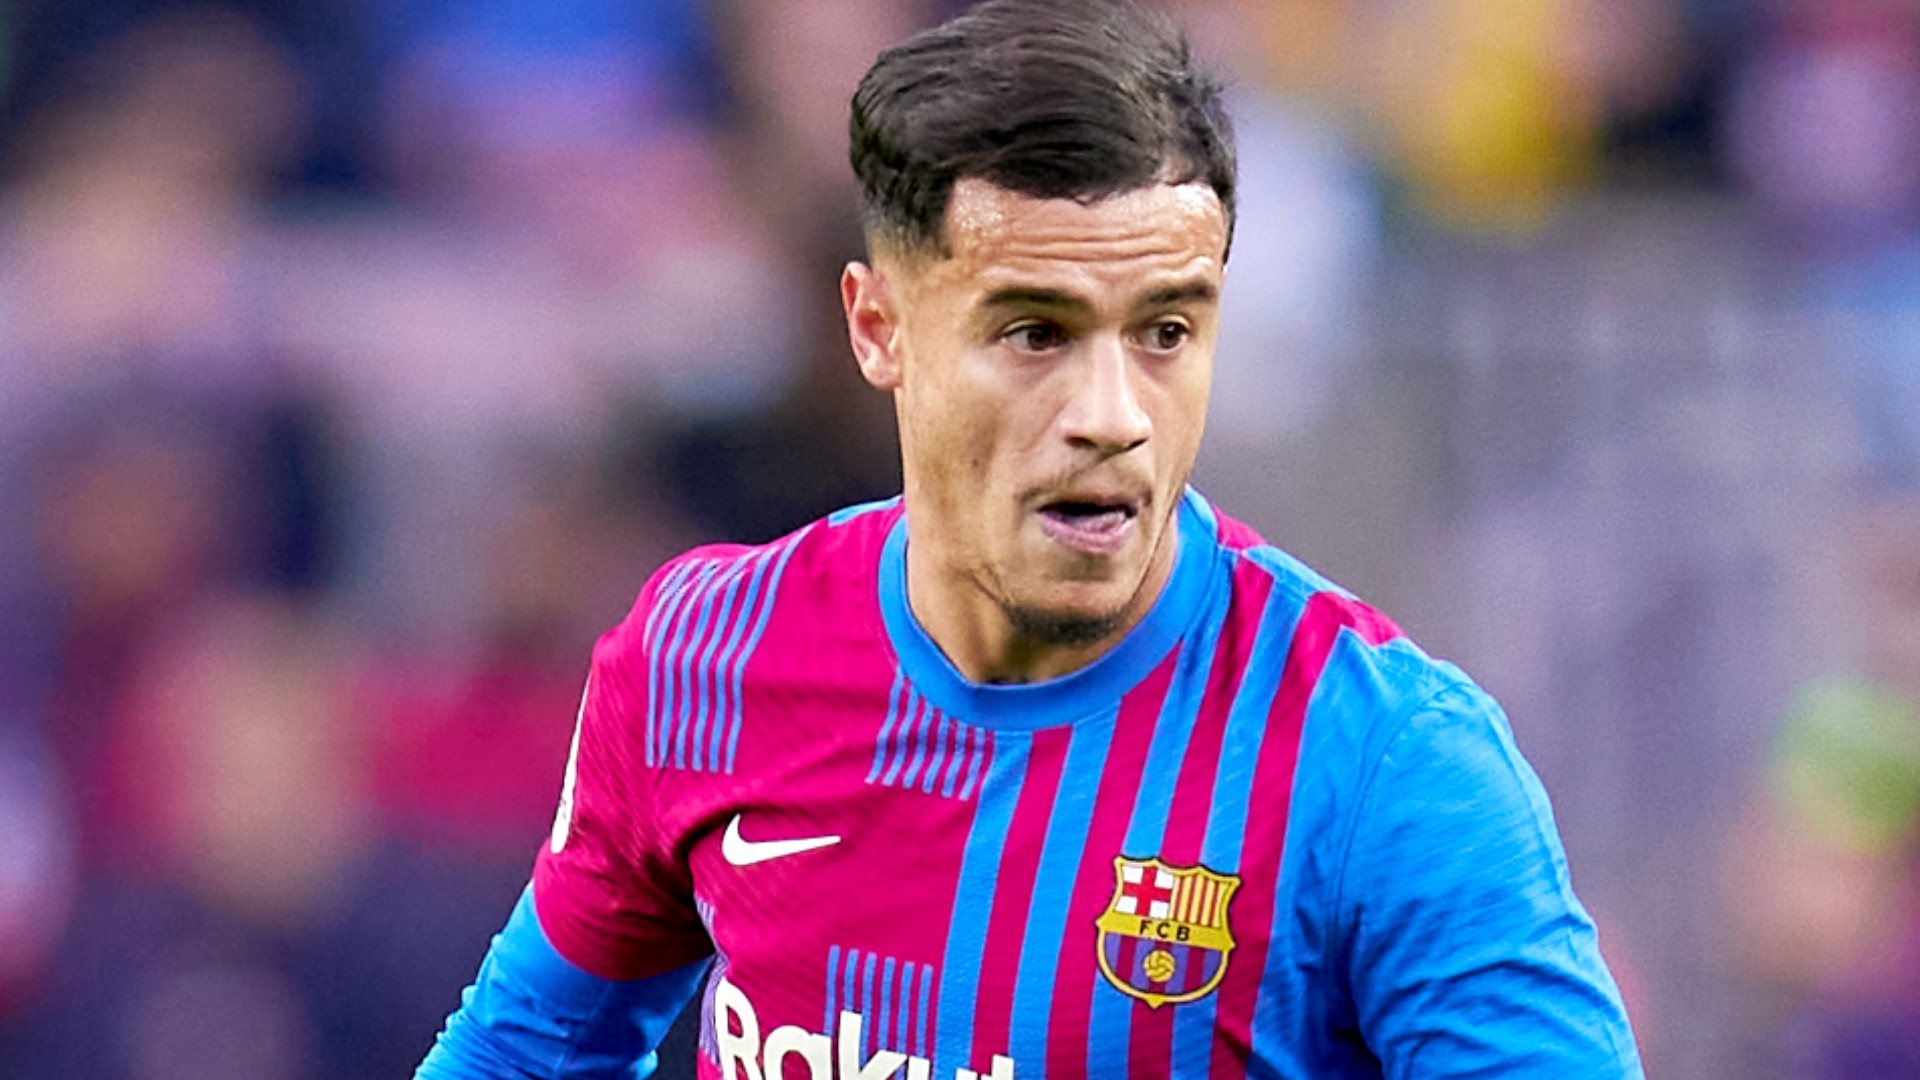 Why Philippe Coutinho's move to Aston Villa makes sense: one last chance to be part of Brazil's 2022 World Cup squad